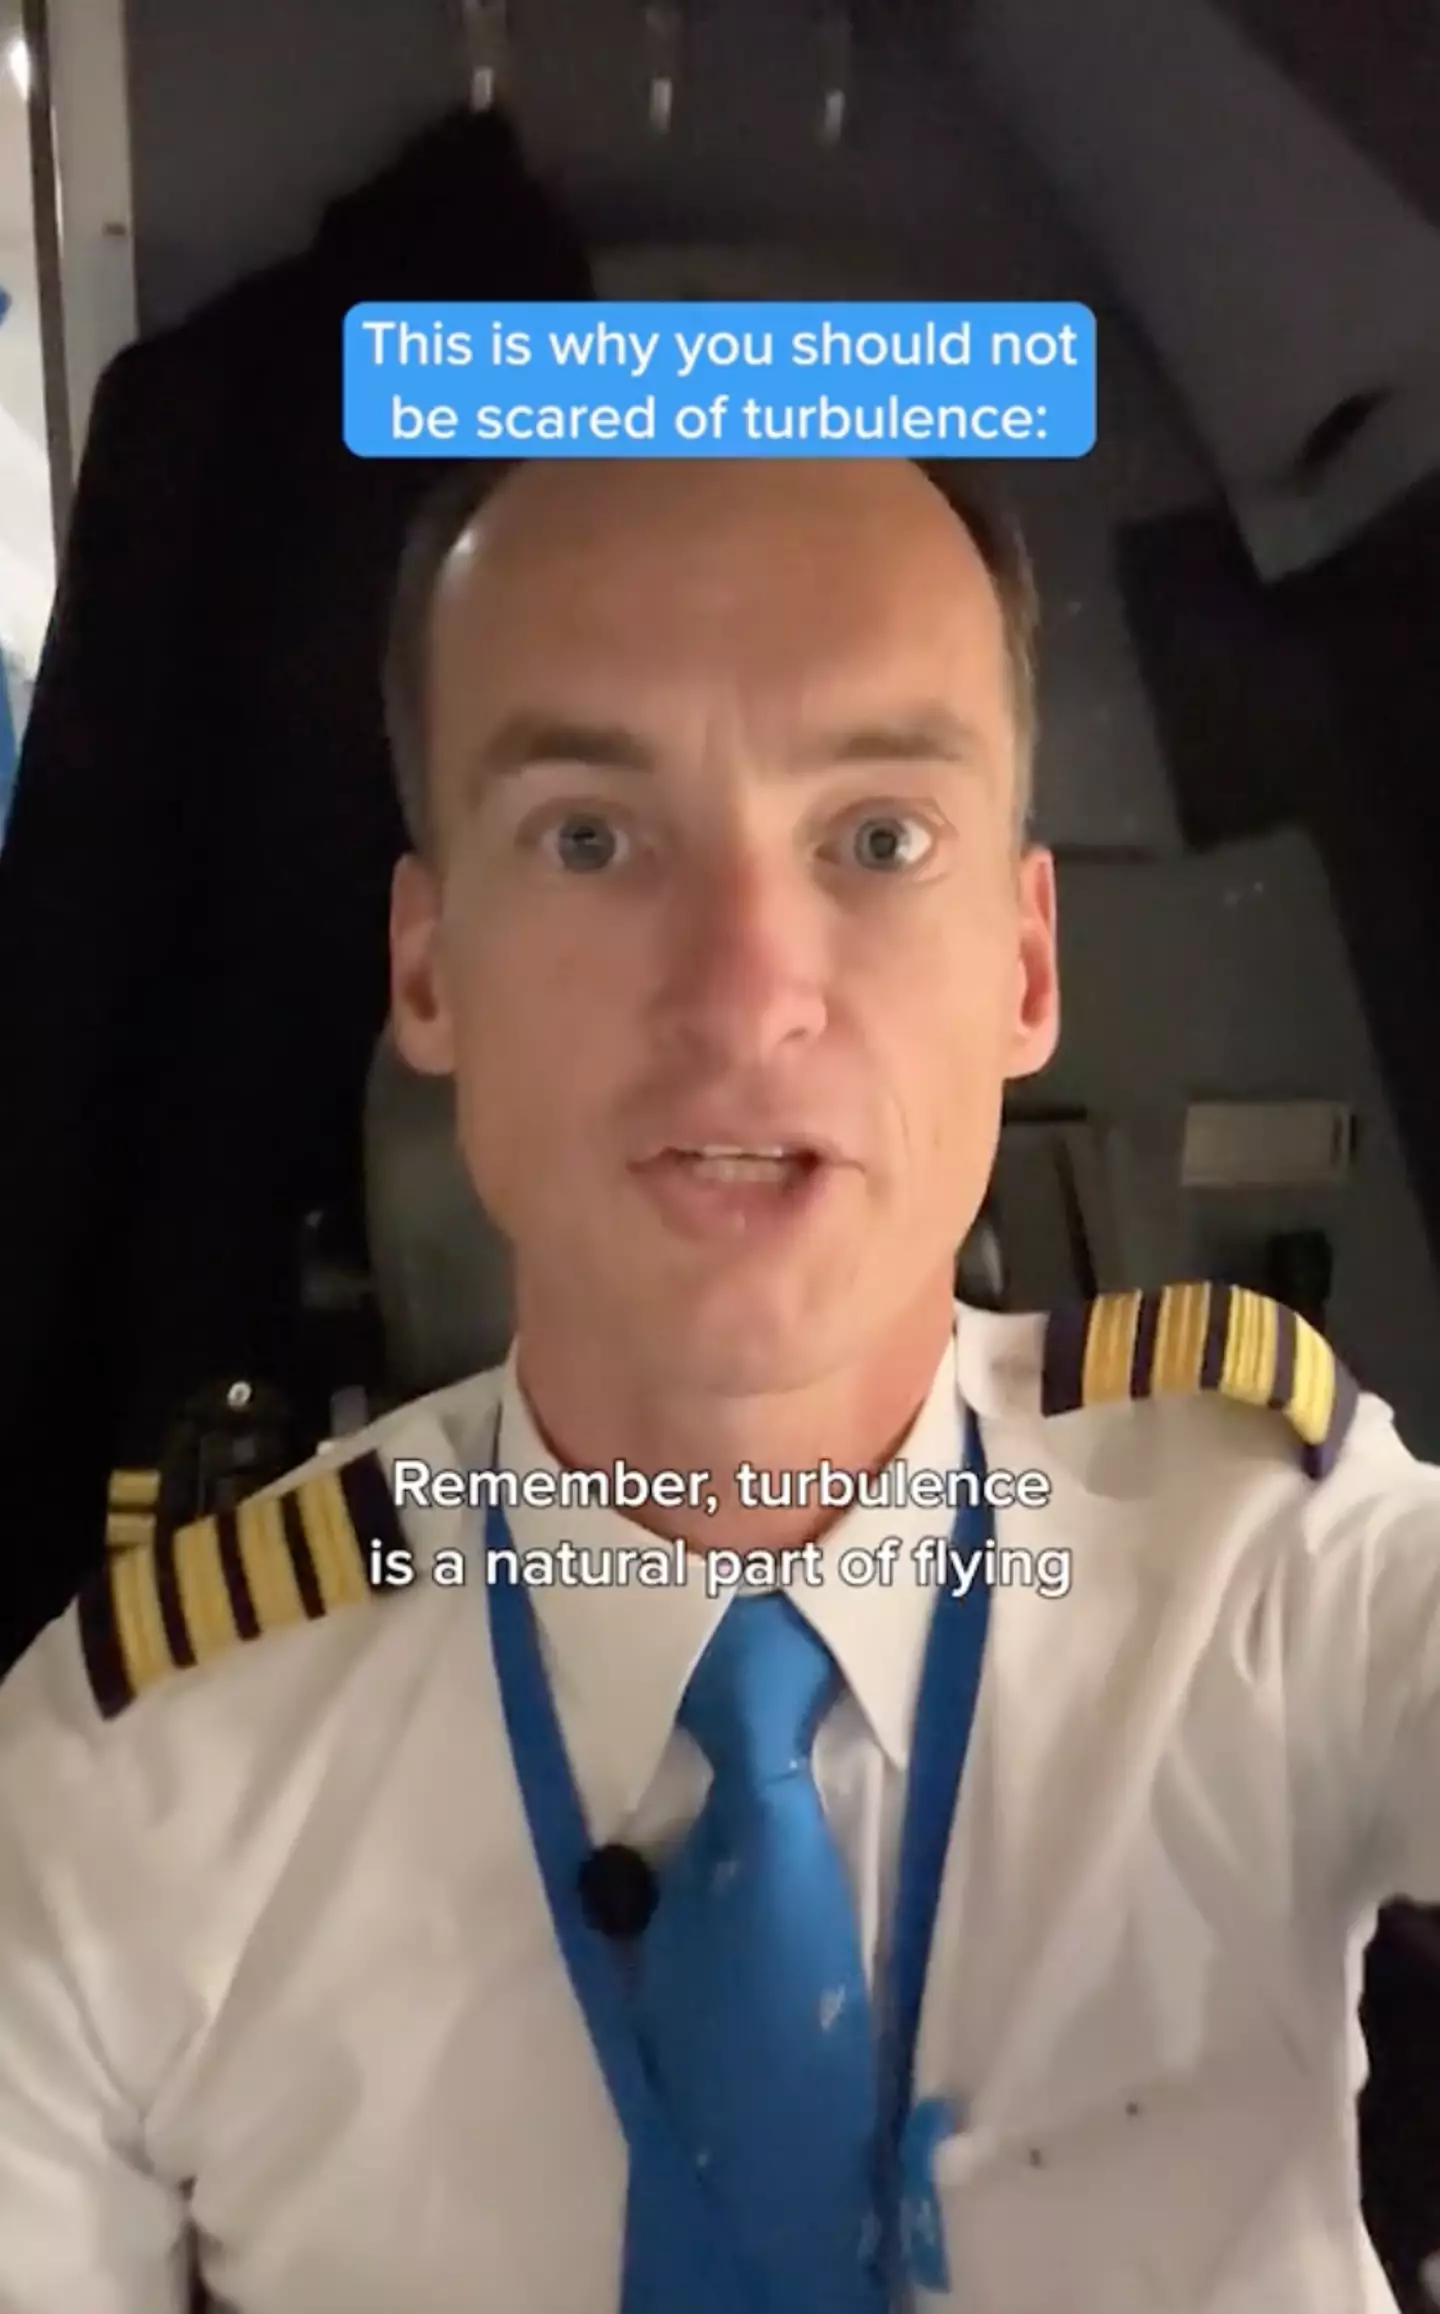 He explained how turbulence works in a TikTok video (